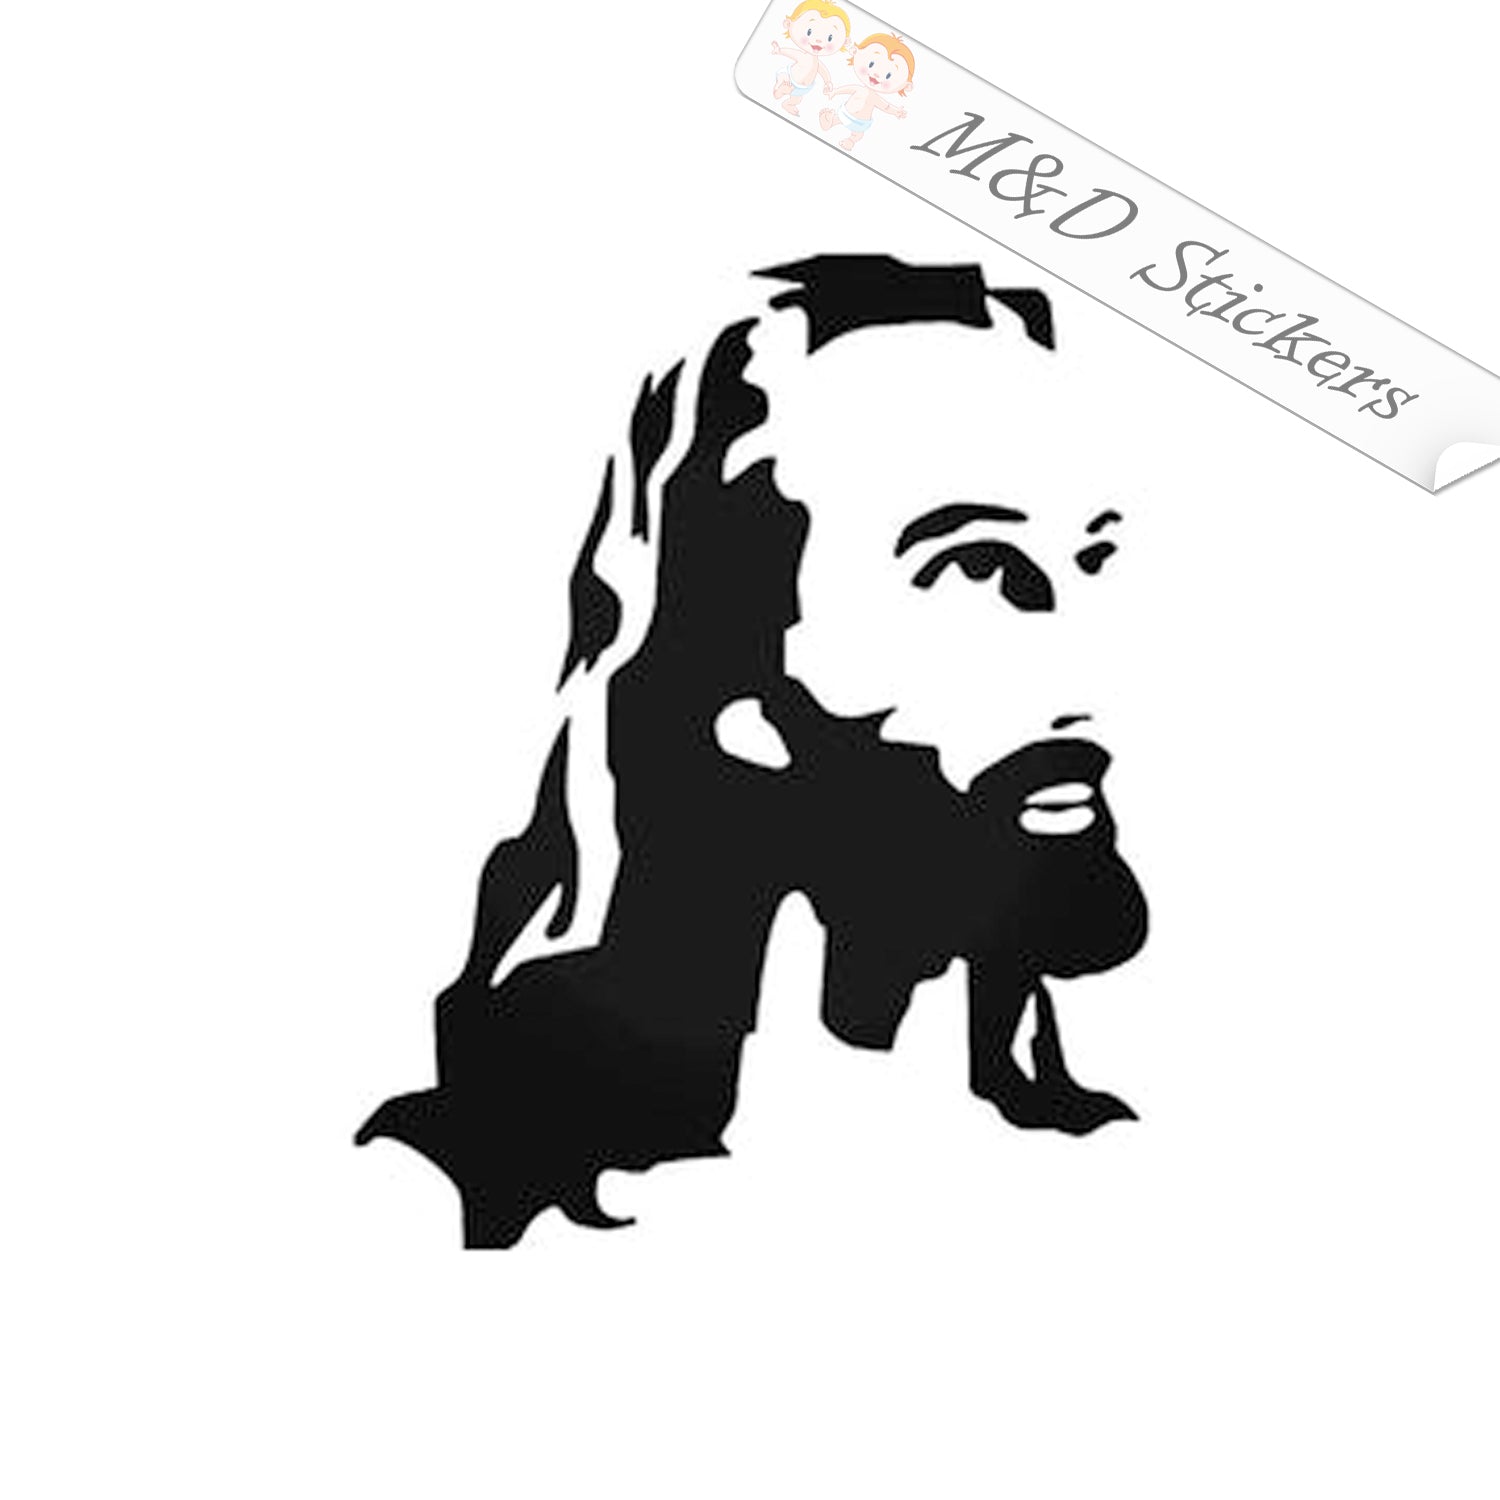 5inx3.5in Oval I Love Jesus Sticker Vinyl Christian Car Decal Cup